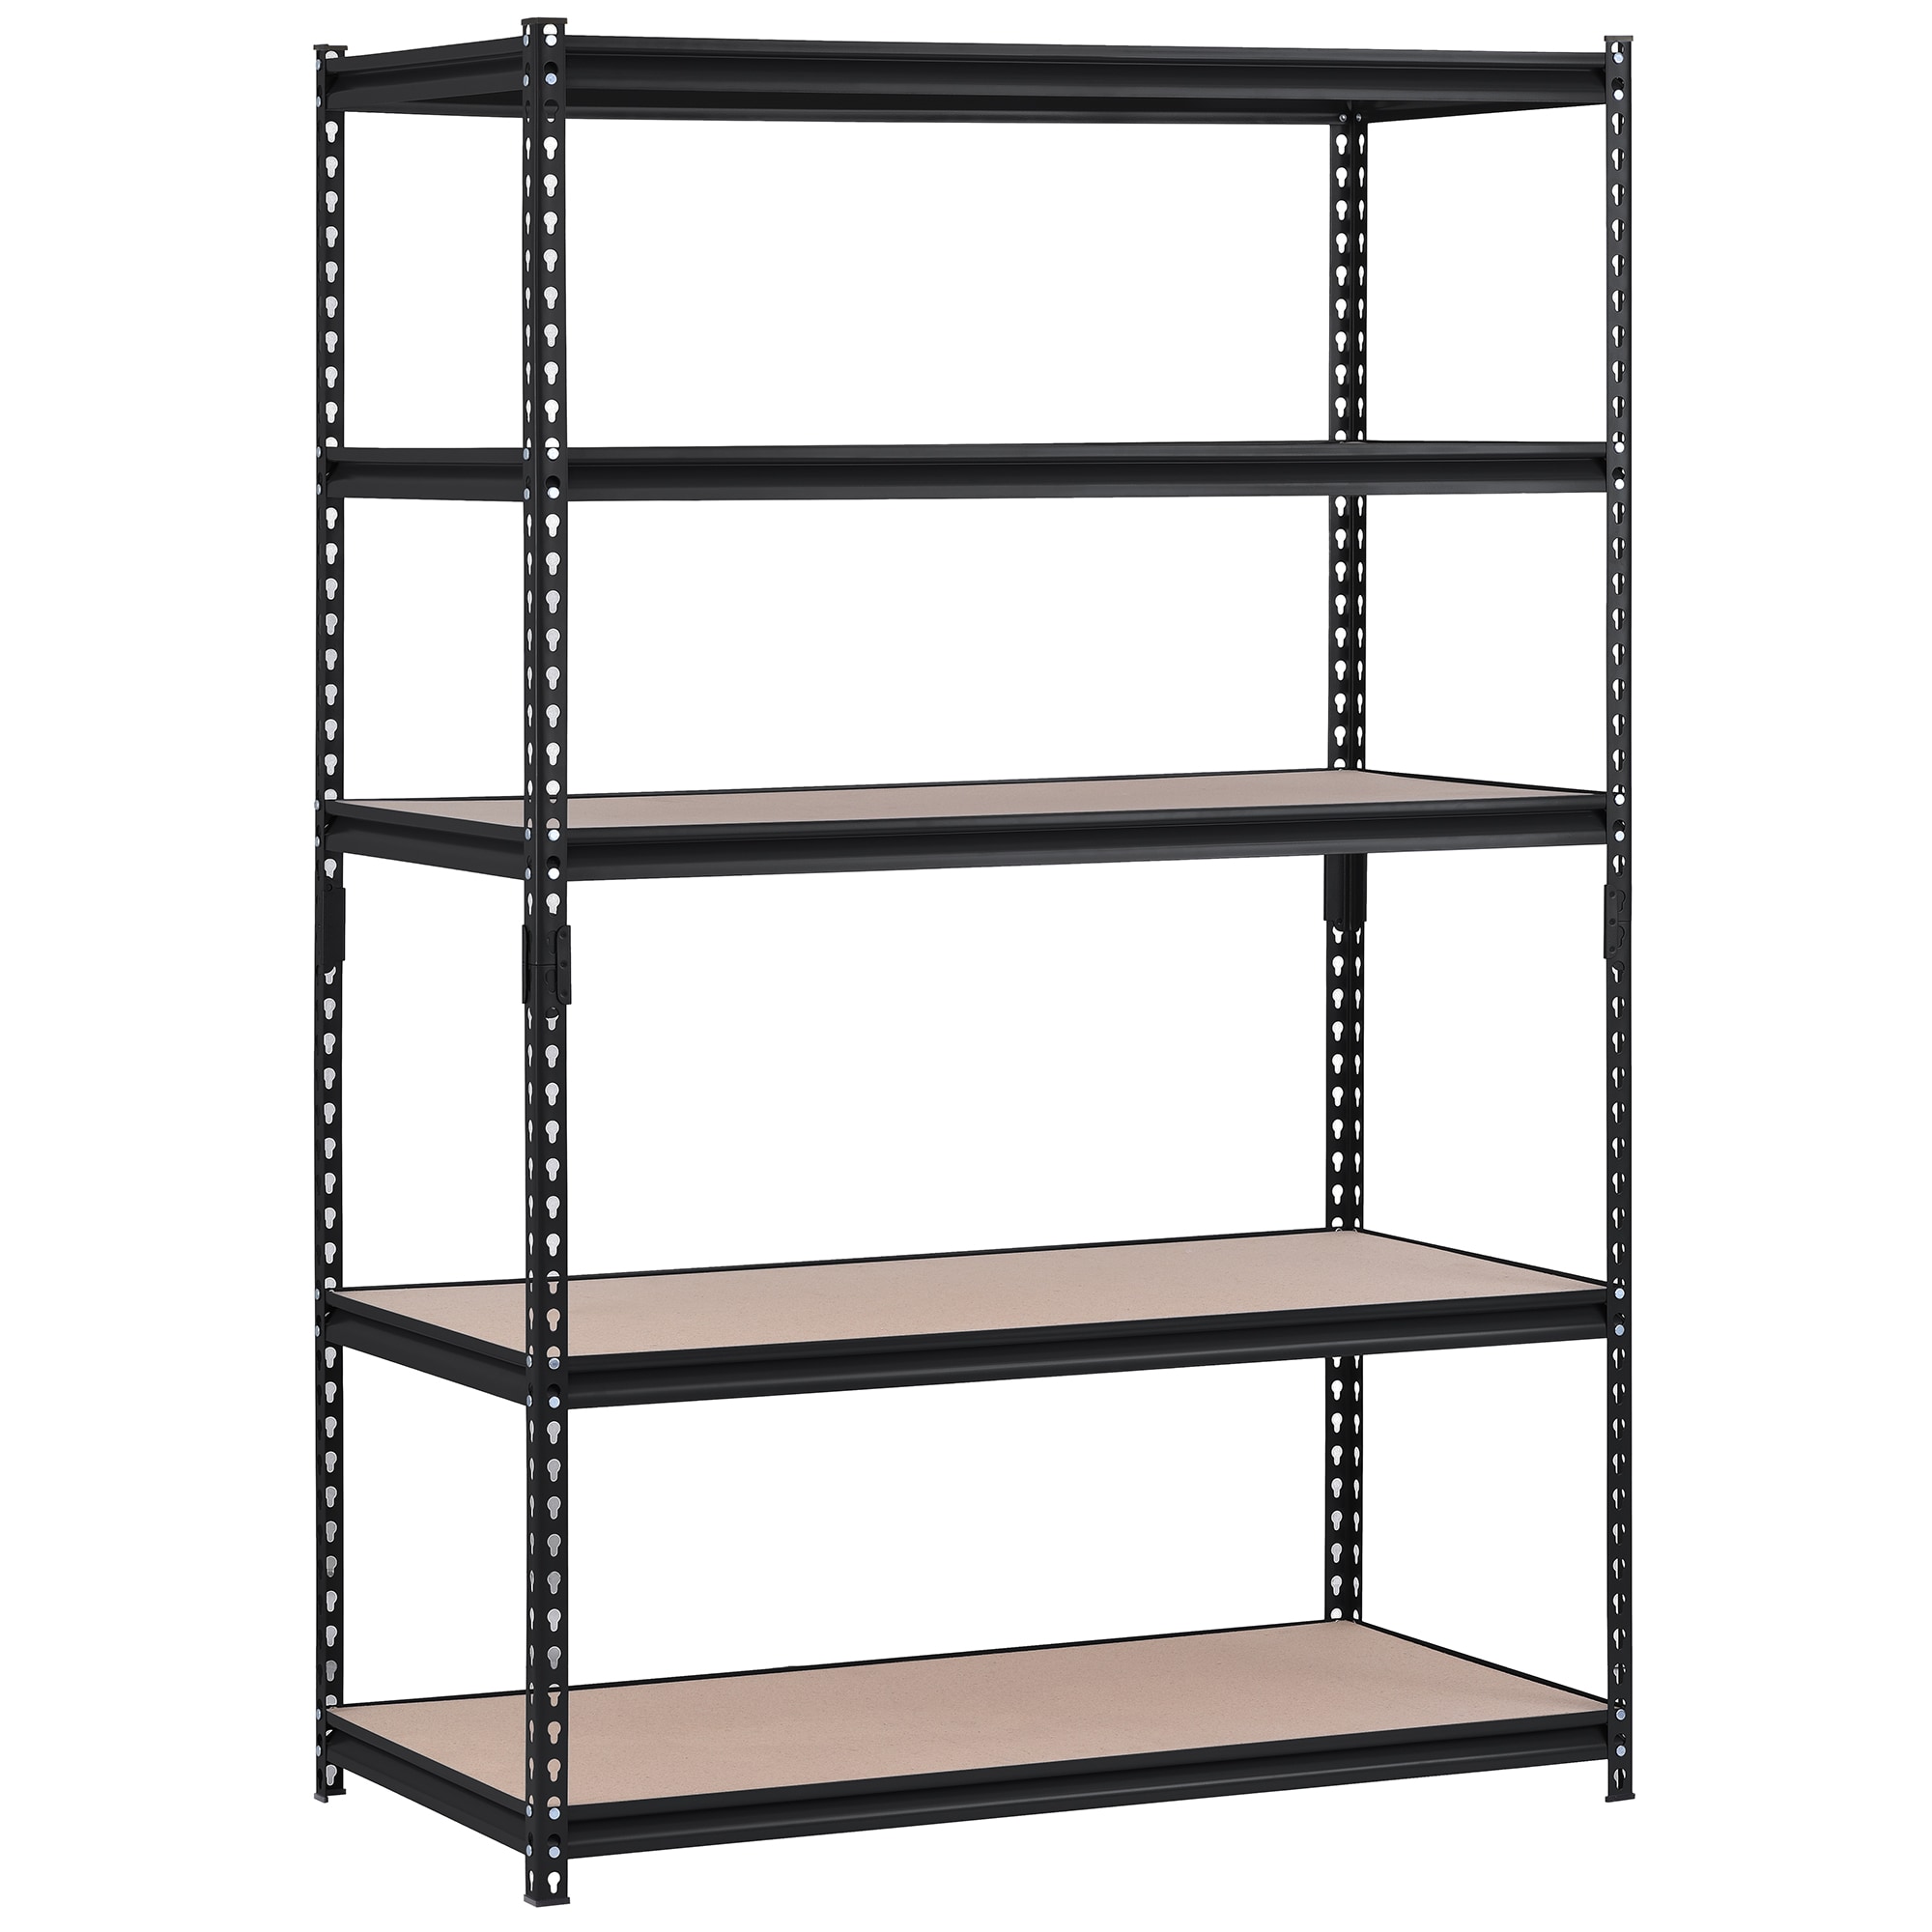 VEVOR Stainless Steel Shelving 60x18.5 inch 4 tier Adjustable Shelf Storage  Unit Stainless Steel Heavy Duty Shelving for Kitchen Commercial Office